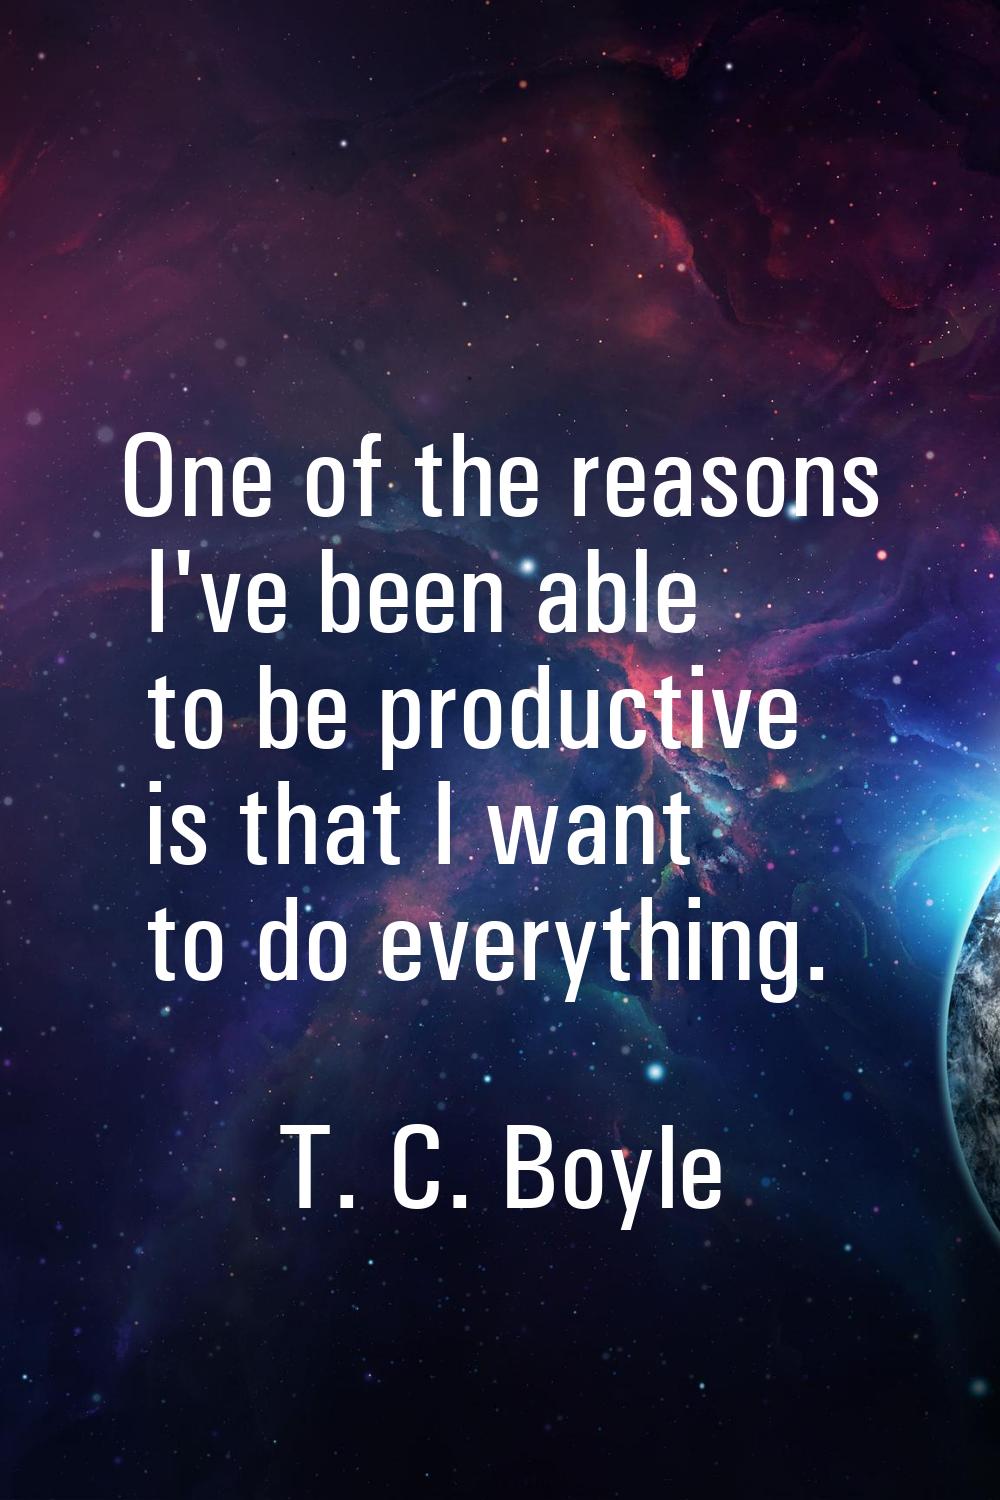 One of the reasons I've been able to be productive is that I want to do everything.